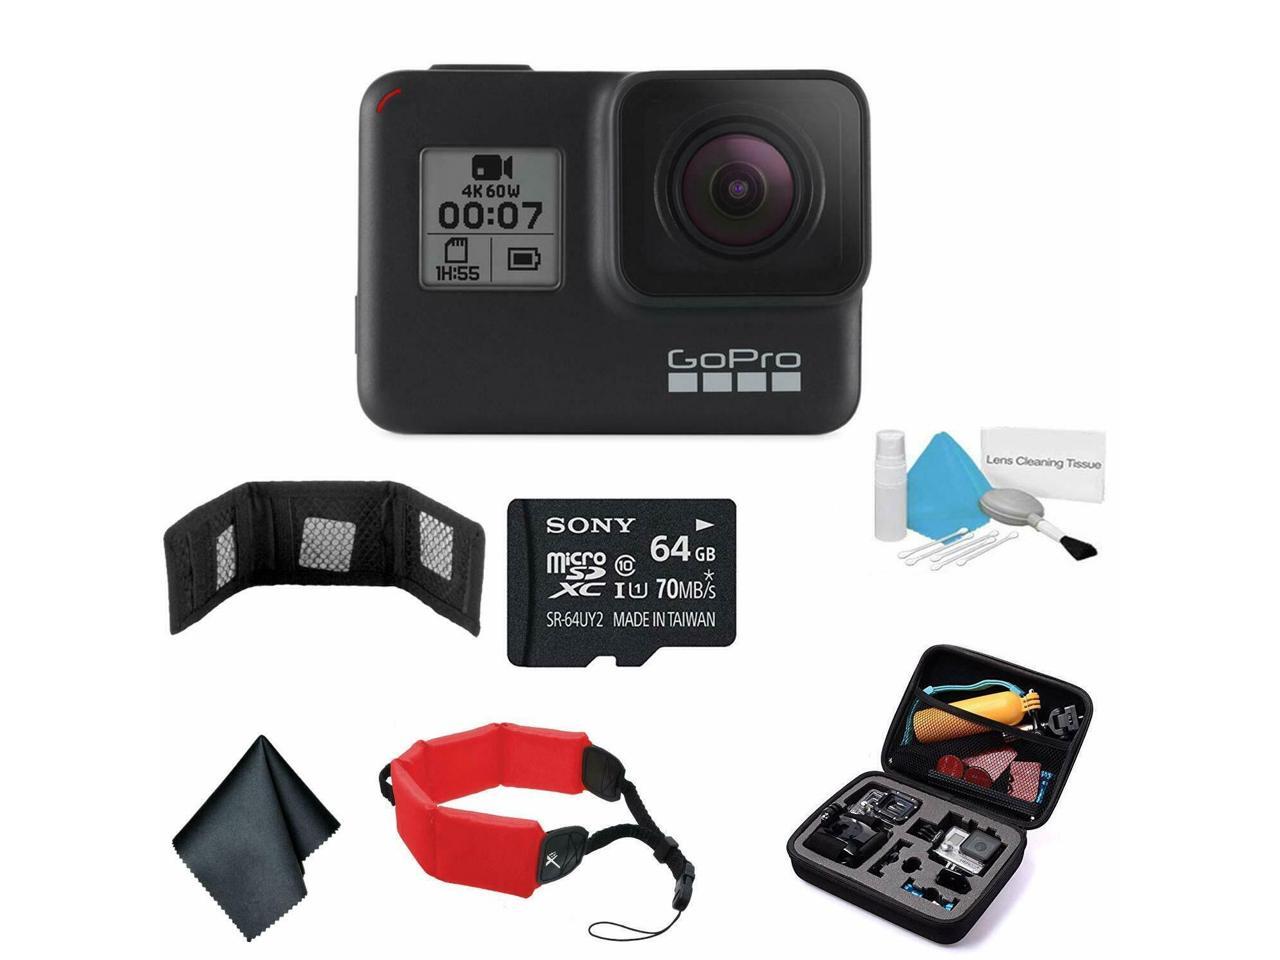 GoPro HERO7 (Black) — Waterproof Digital Action Camera with Touch Screen 4K HD Video 12MP Photos Live Streaming Stabilization - Bundle with 64GB Memory Cards + Floating Strap + More